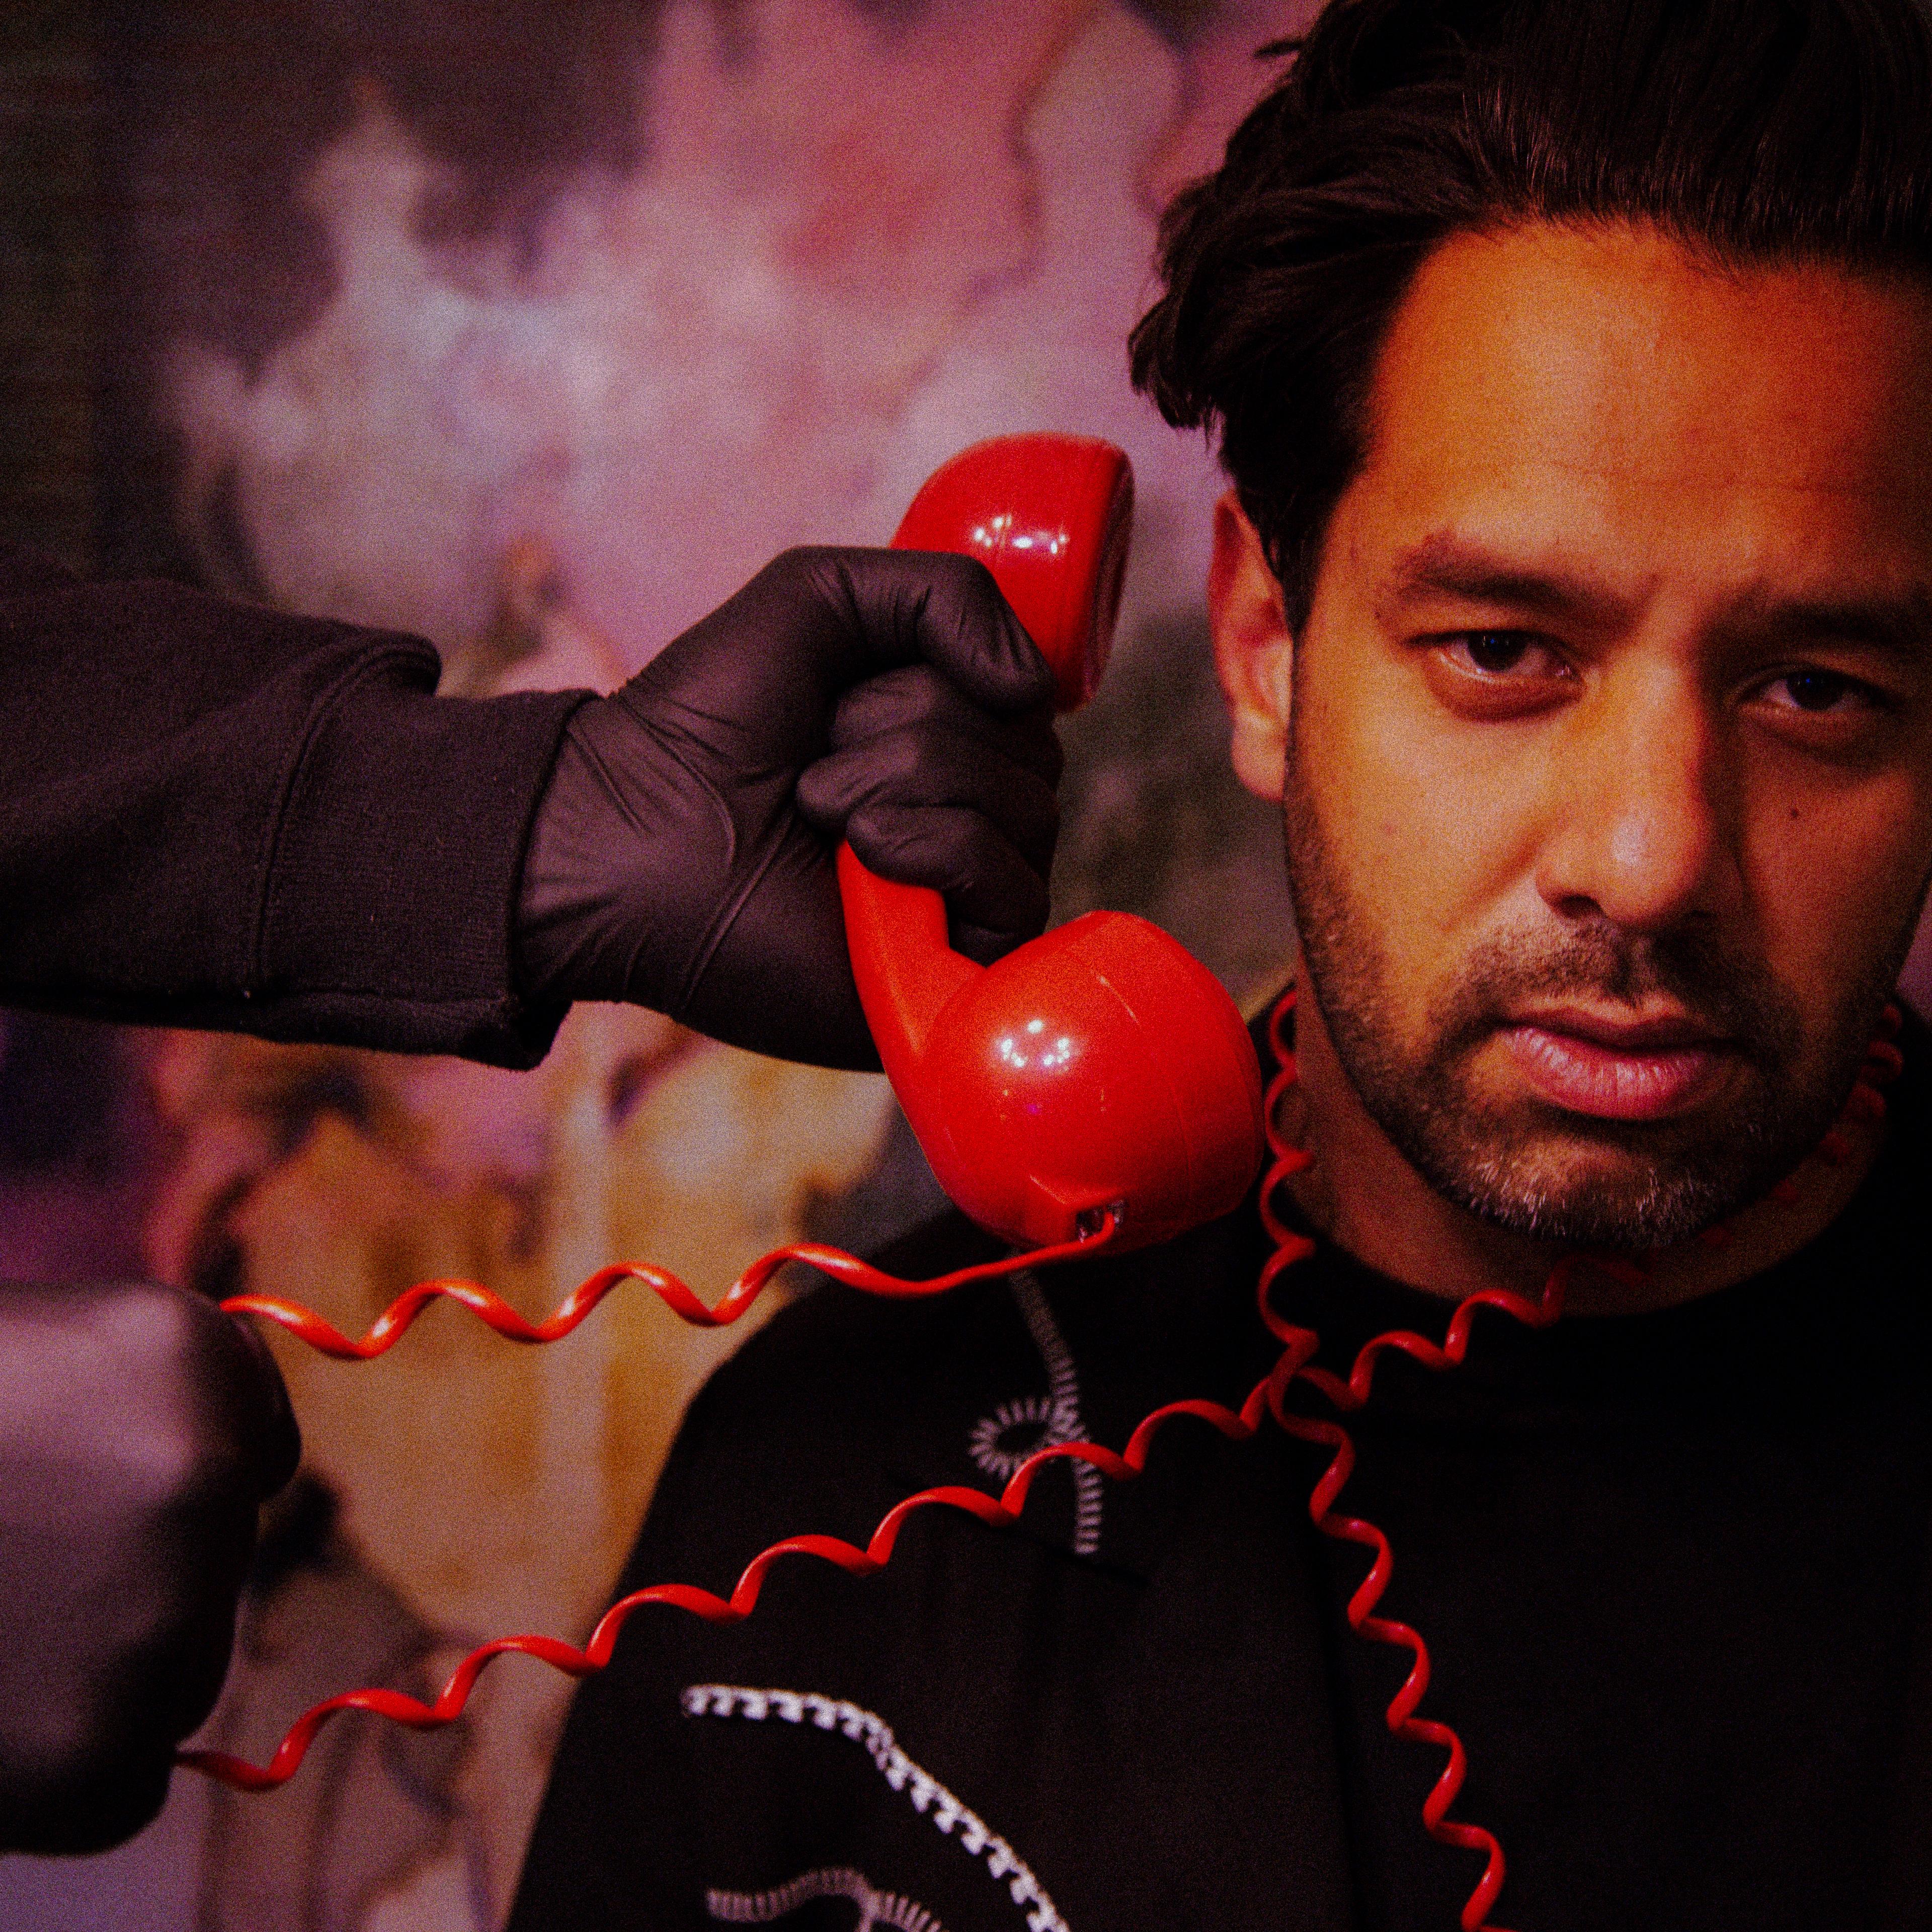 A man with a red phone cord wrapped around him and another person with a black glove holding the phone to his ear